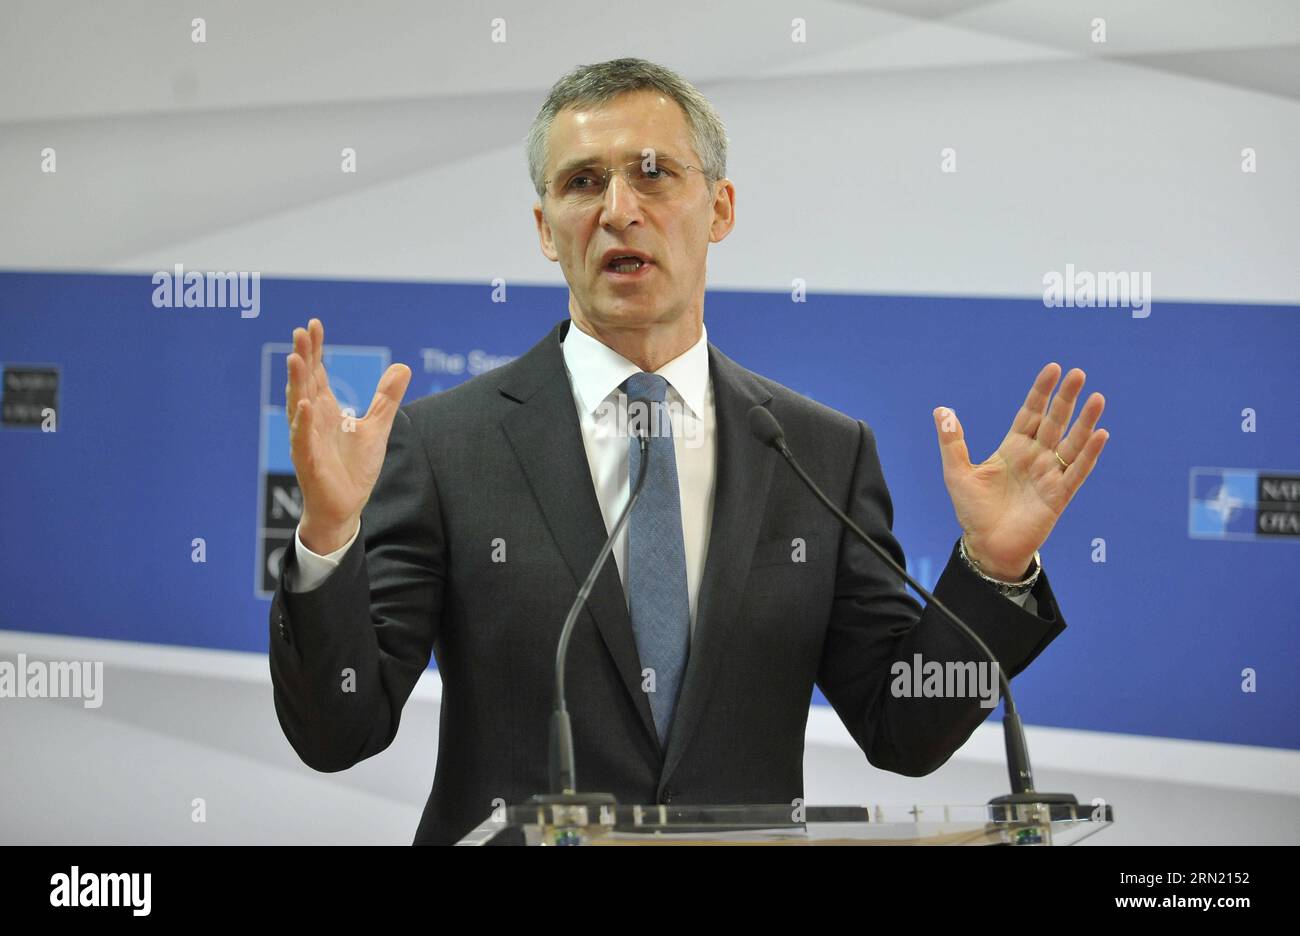 (150130) -- BRUSSELS, Jan. 30, 2015 -- NATO Secretary General Jens Stoltenberg speaks during the NATO 2014 Annual Report press conference at its headquarters in Brussels, Belgium, on Jan. 30, 2015. )(zhf) BELGIUM-BRUSSELS-NATO-ANNUAL REPORT YexPingfan PUBLICATIONxNOTxINxCHN   Brussels Jan 30 2015 NATO Secretary General Jens Stoltenberg Speaks during The NATO 2014 Annual Report Press Conference AT its Headquarters in Brussels Belgium ON Jan 30 2015  Belgium Brussels NATO Annual Report  PUBLICATIONxNOTxINxCHN Stock Photo